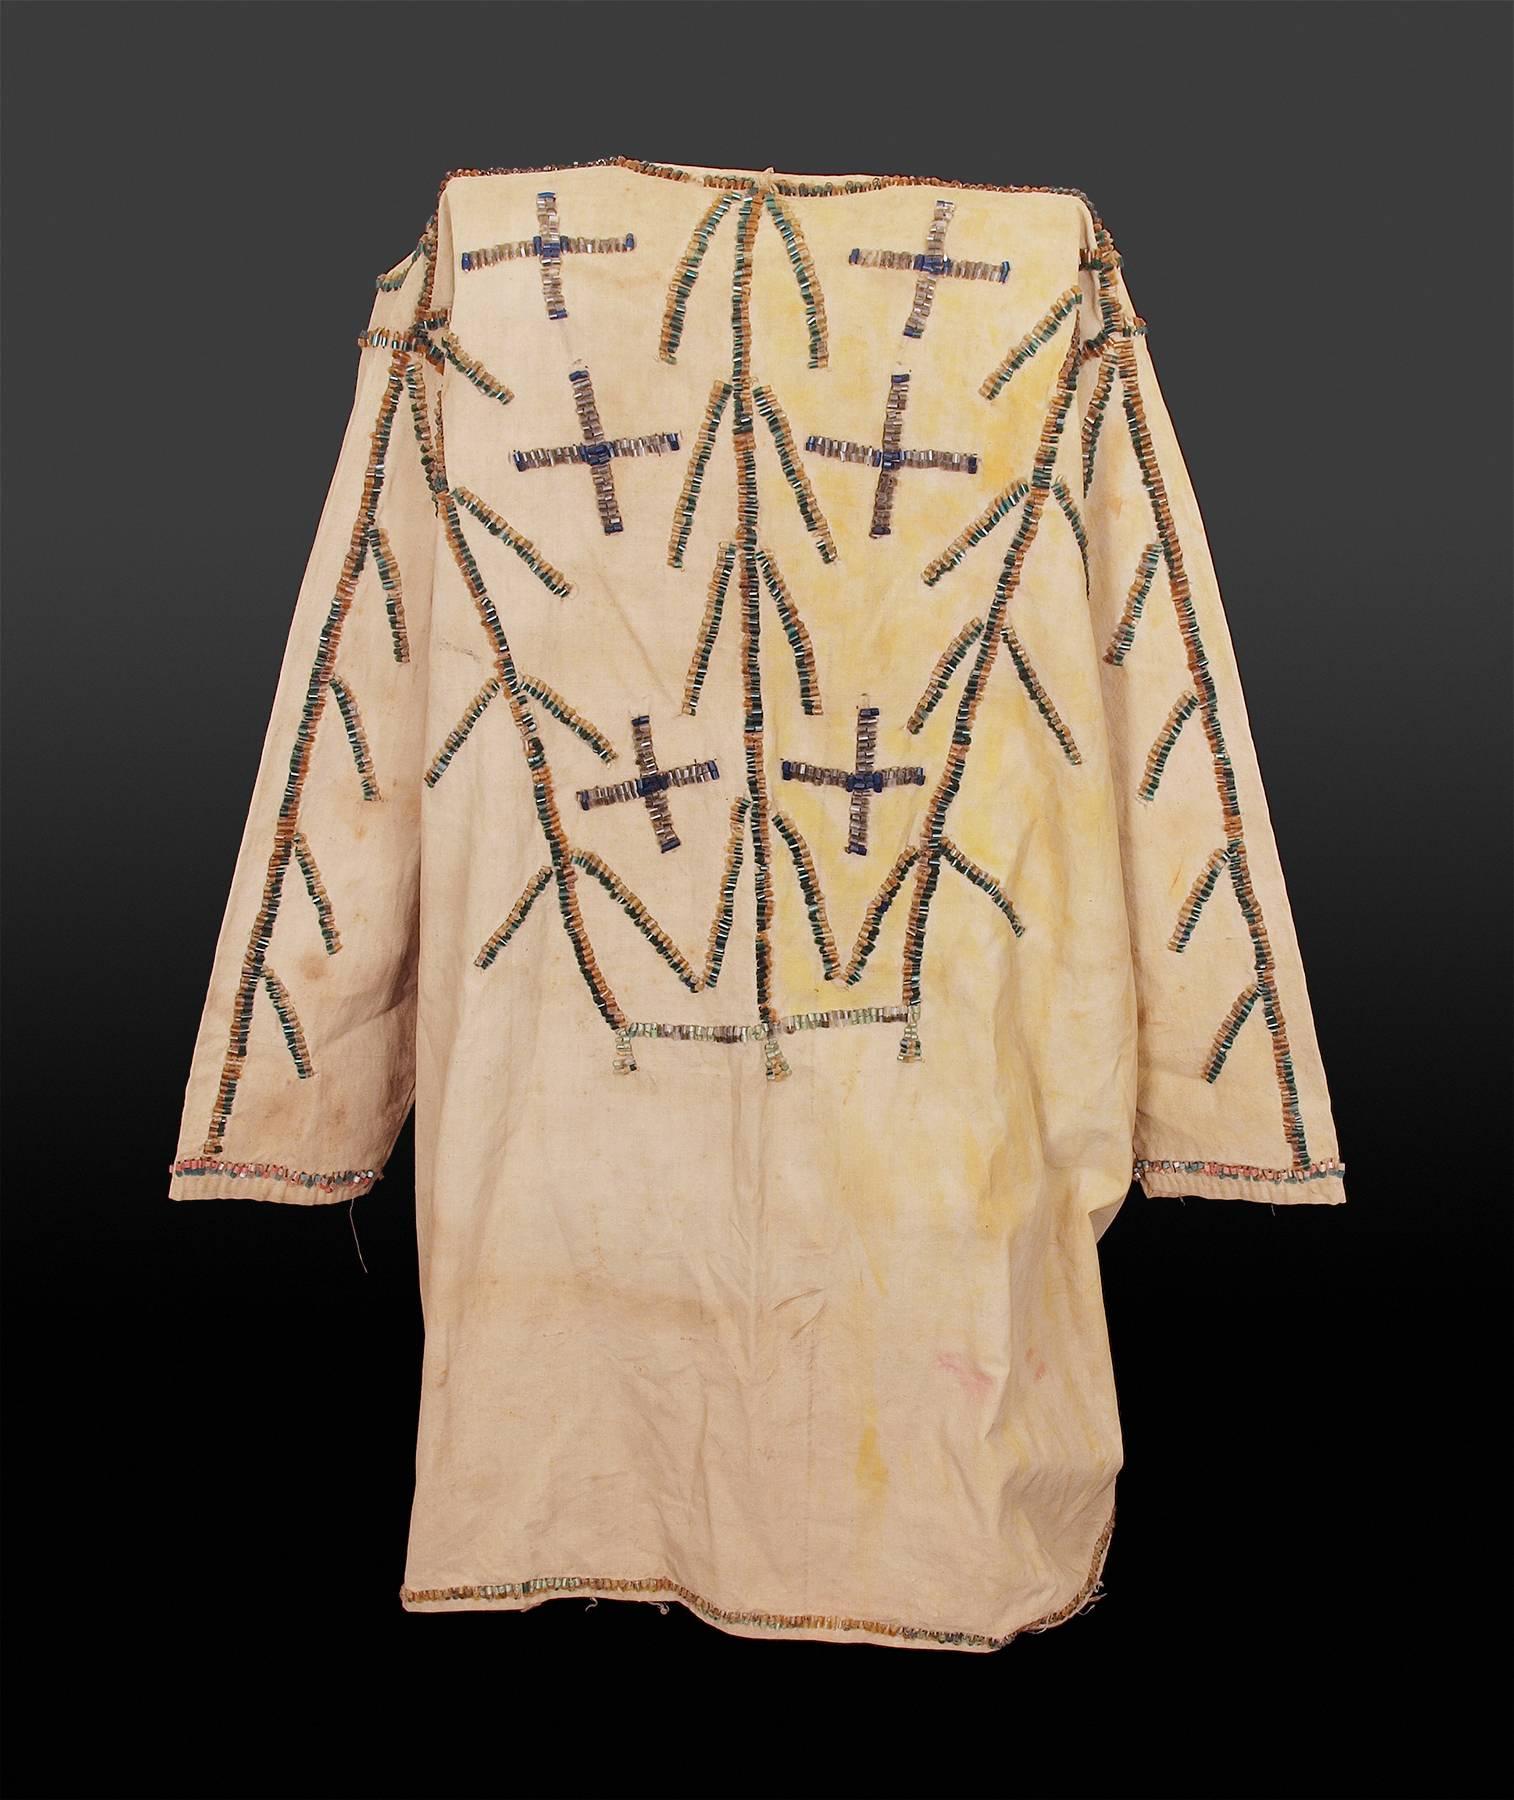 Vintage 19th century Native American Dance Regalia, Sioux (Plains Indian). This jacket was created during the last quarter of the 19th century for wear in the Grass Dance - a fast paced pow wow dance that originated with warrior societies.